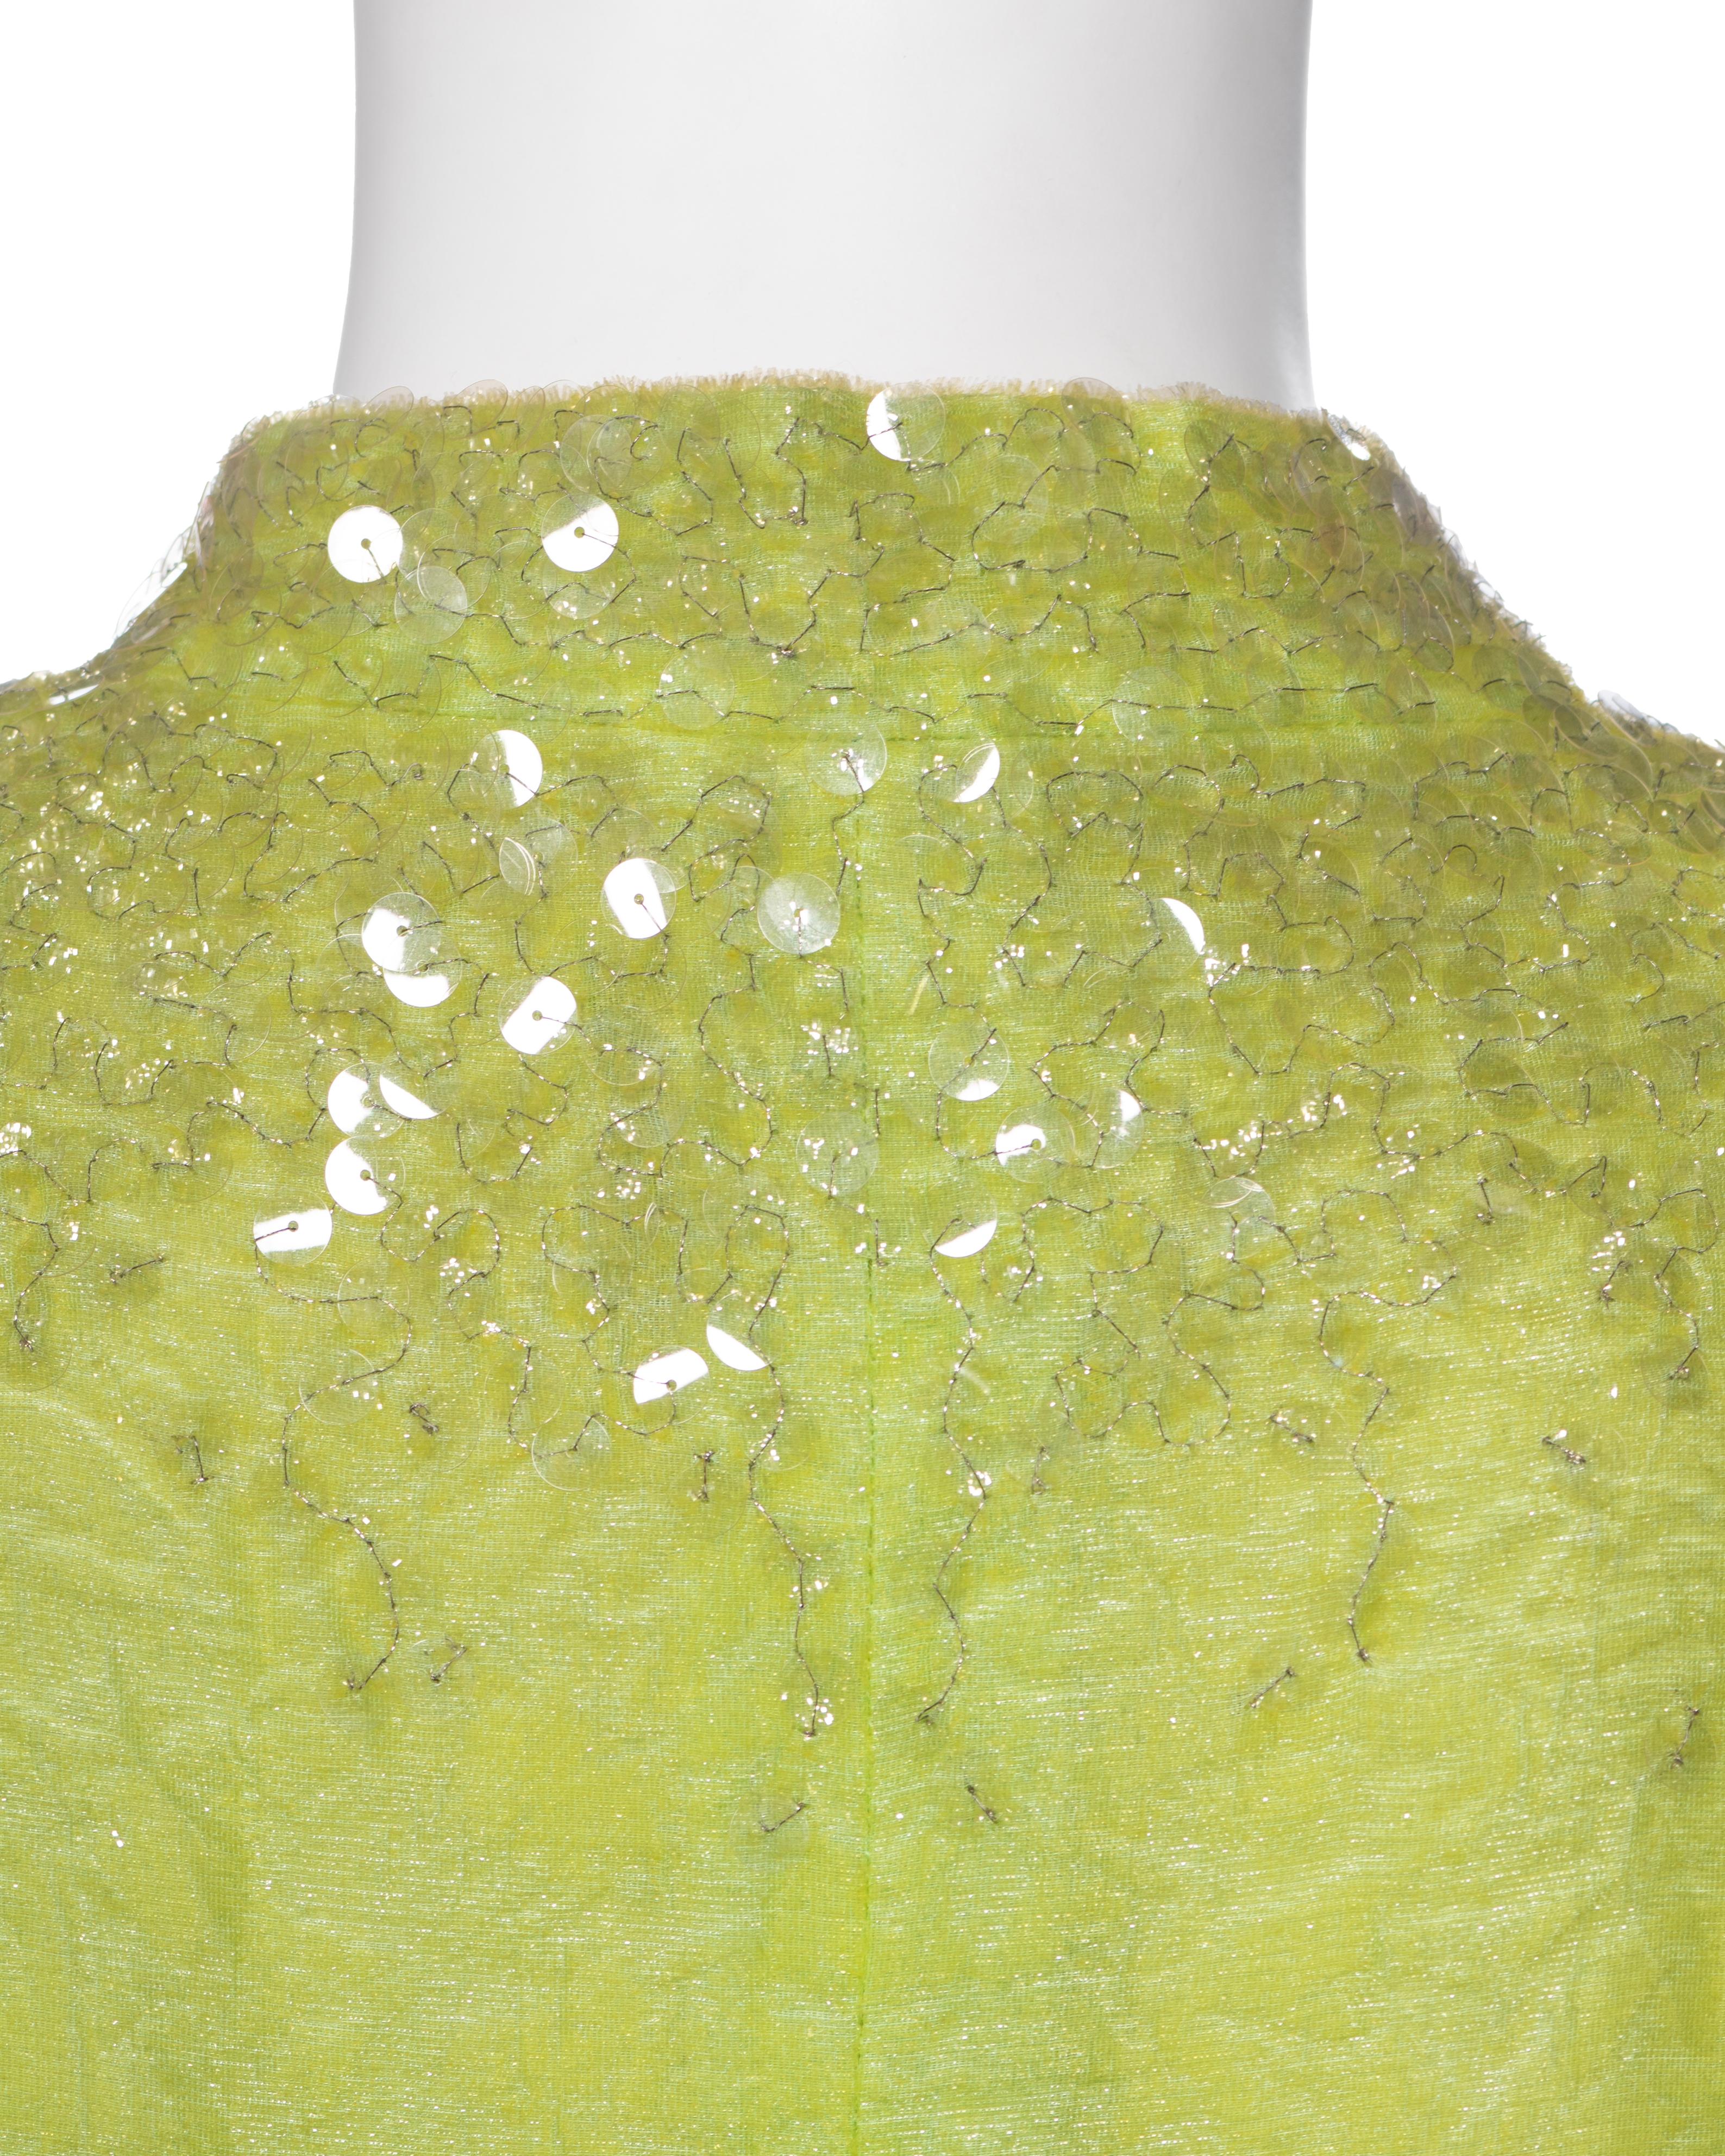 Chanel by Karl Lagerfeld Embellished Lime Green Velvet Dress and Jacket, ss 1997 For Sale 15